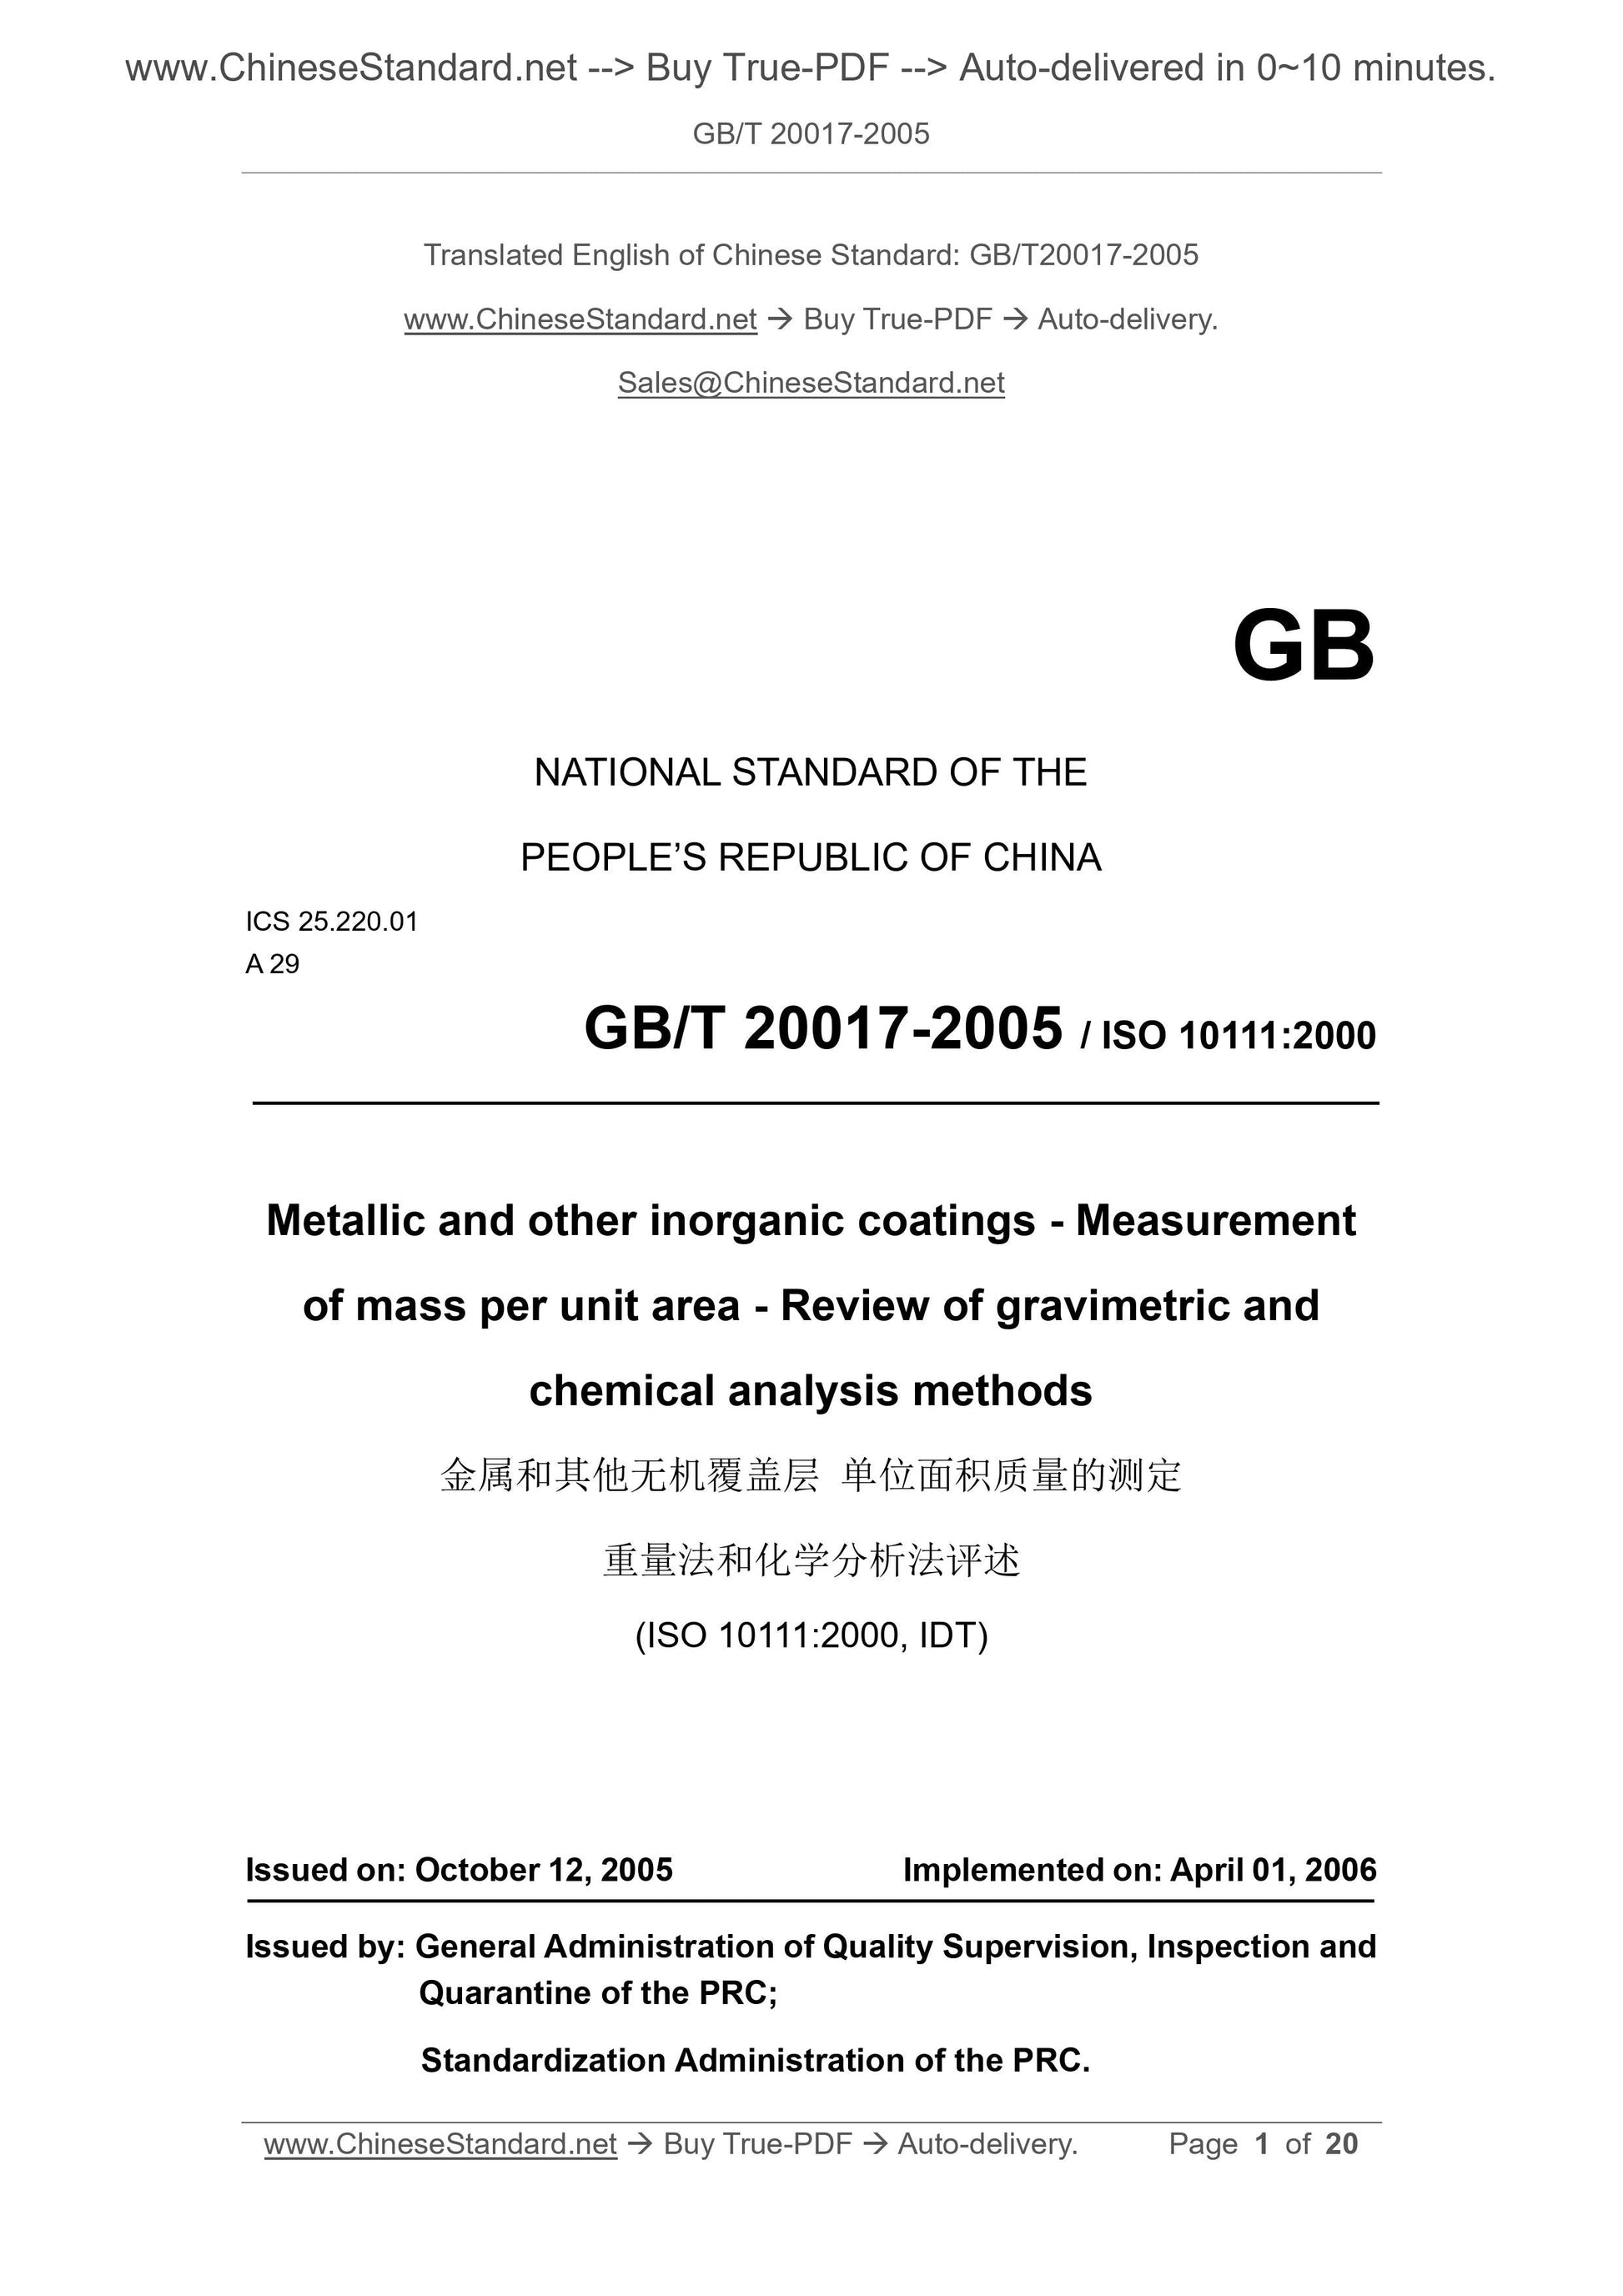 GB/T 20017-2005 Page 1